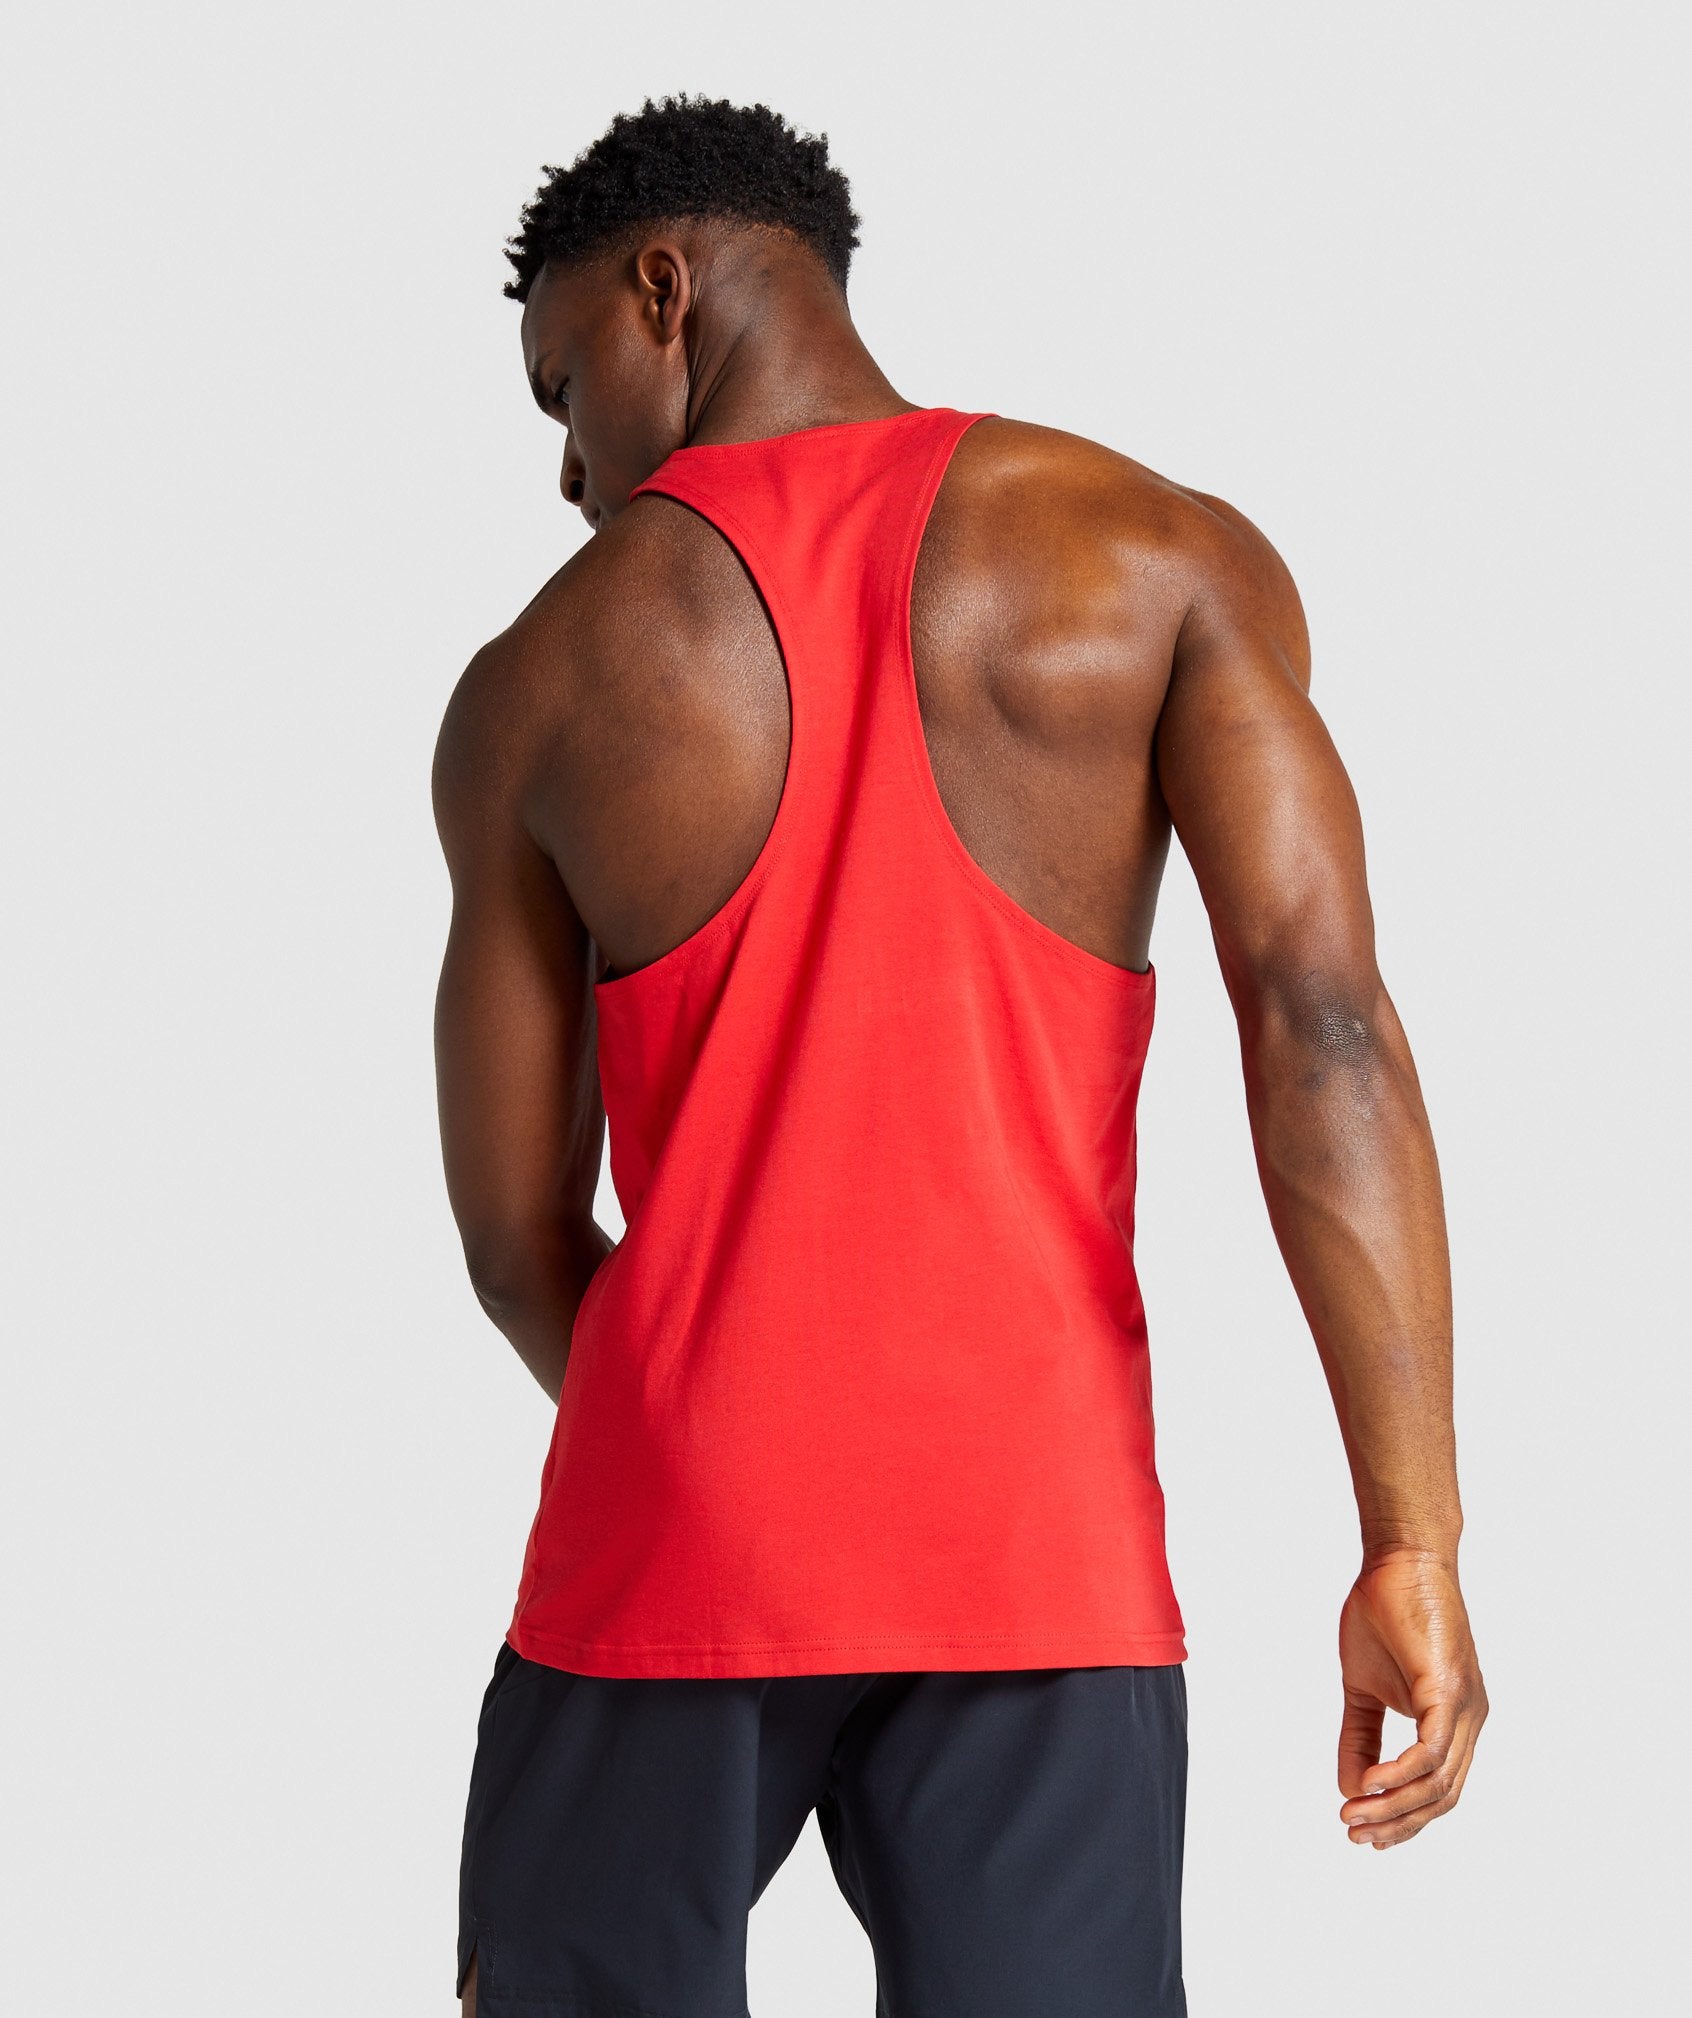 Apex Stringer in Red - view 2